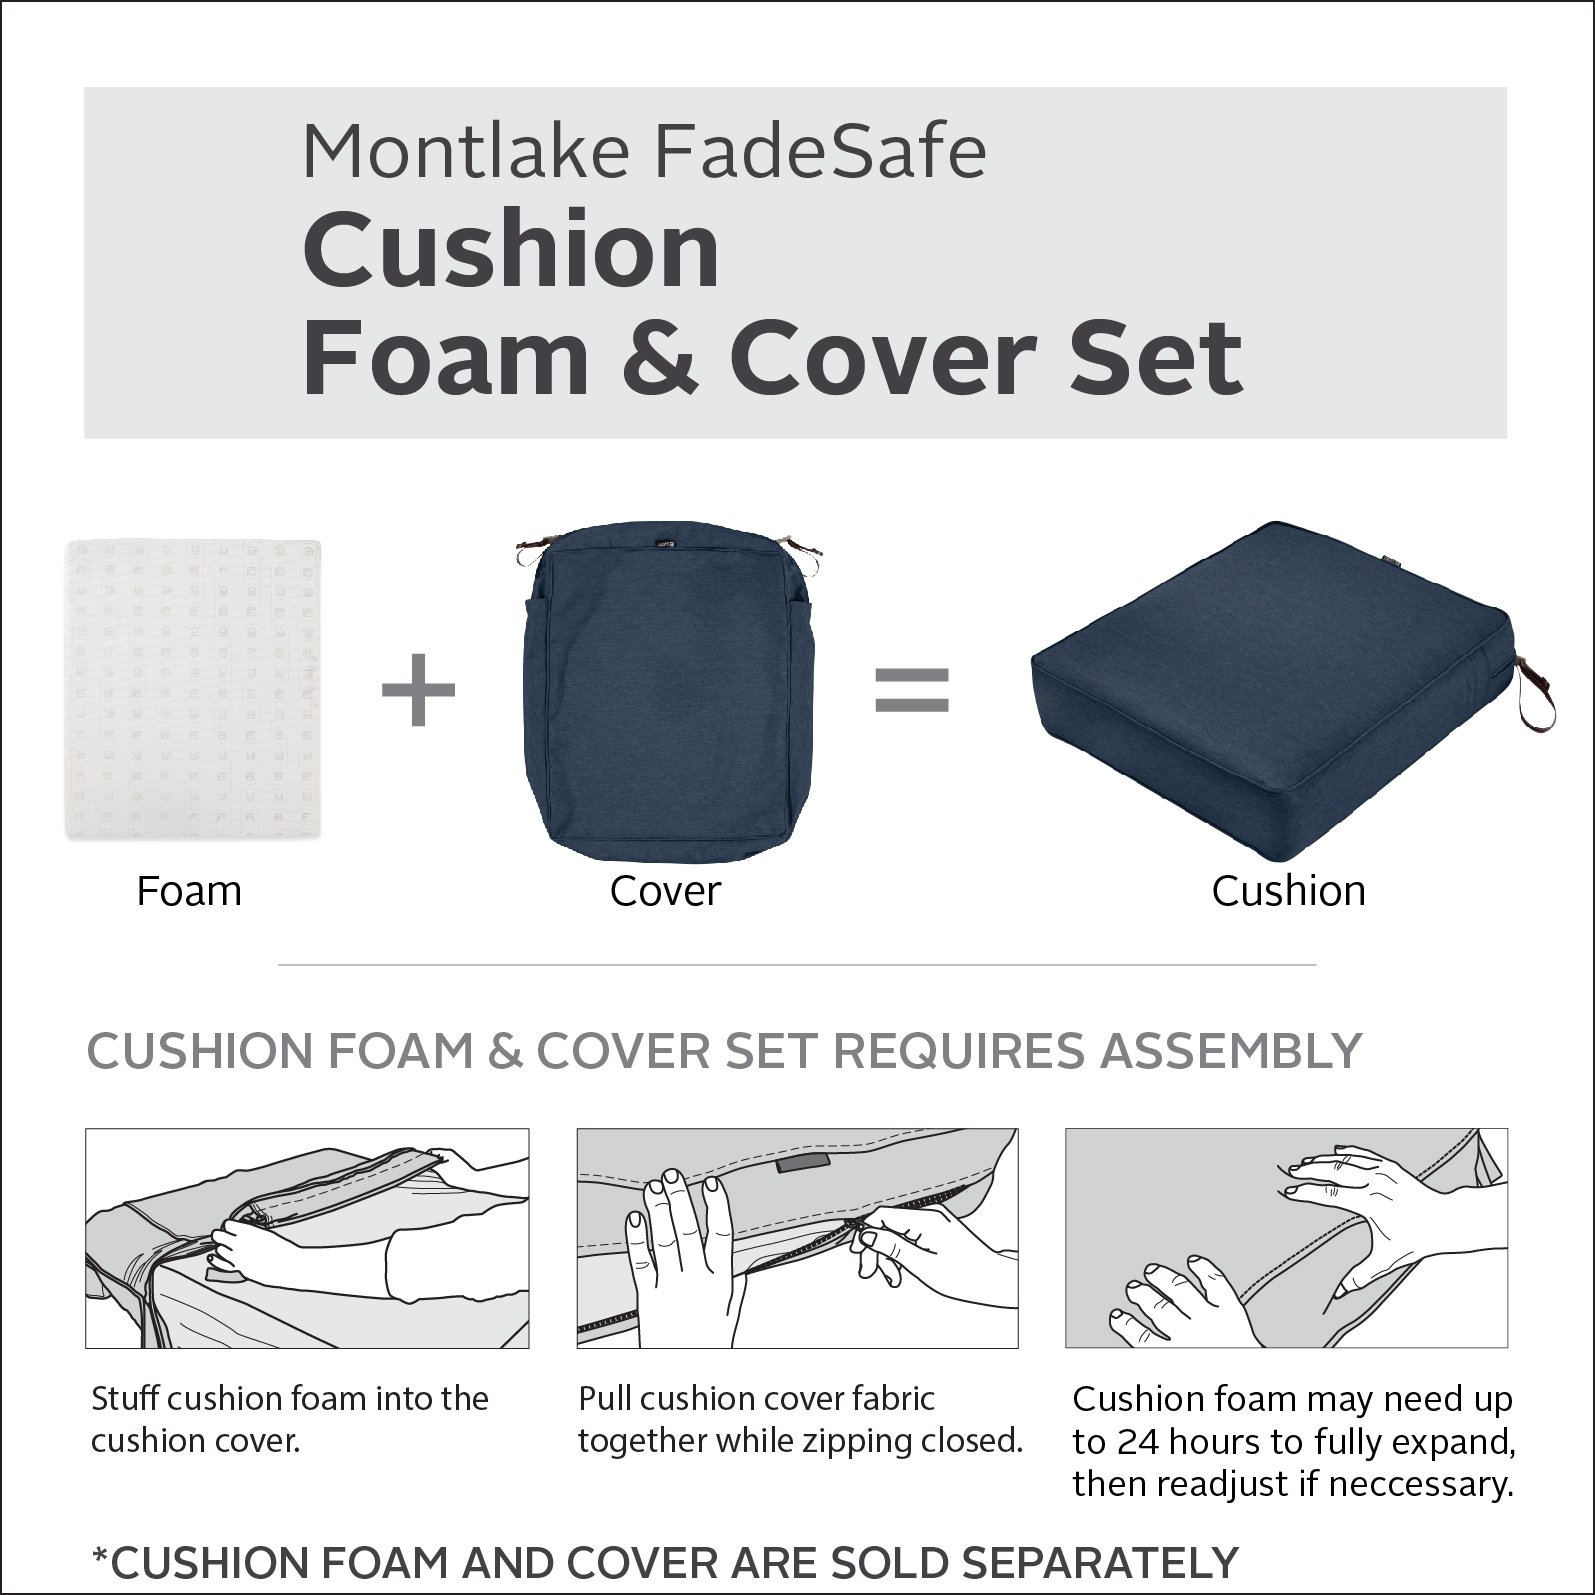 Classic Accessories Montlake FadeSafe Water-Resistant 59 x 18 x 3 Inch Outdoor Bench/Settee Cushion Slip Cover, Patio Furniture Swing Cushion Cover, Heather Indigo Blue, Patio Furniture Cushion Covers